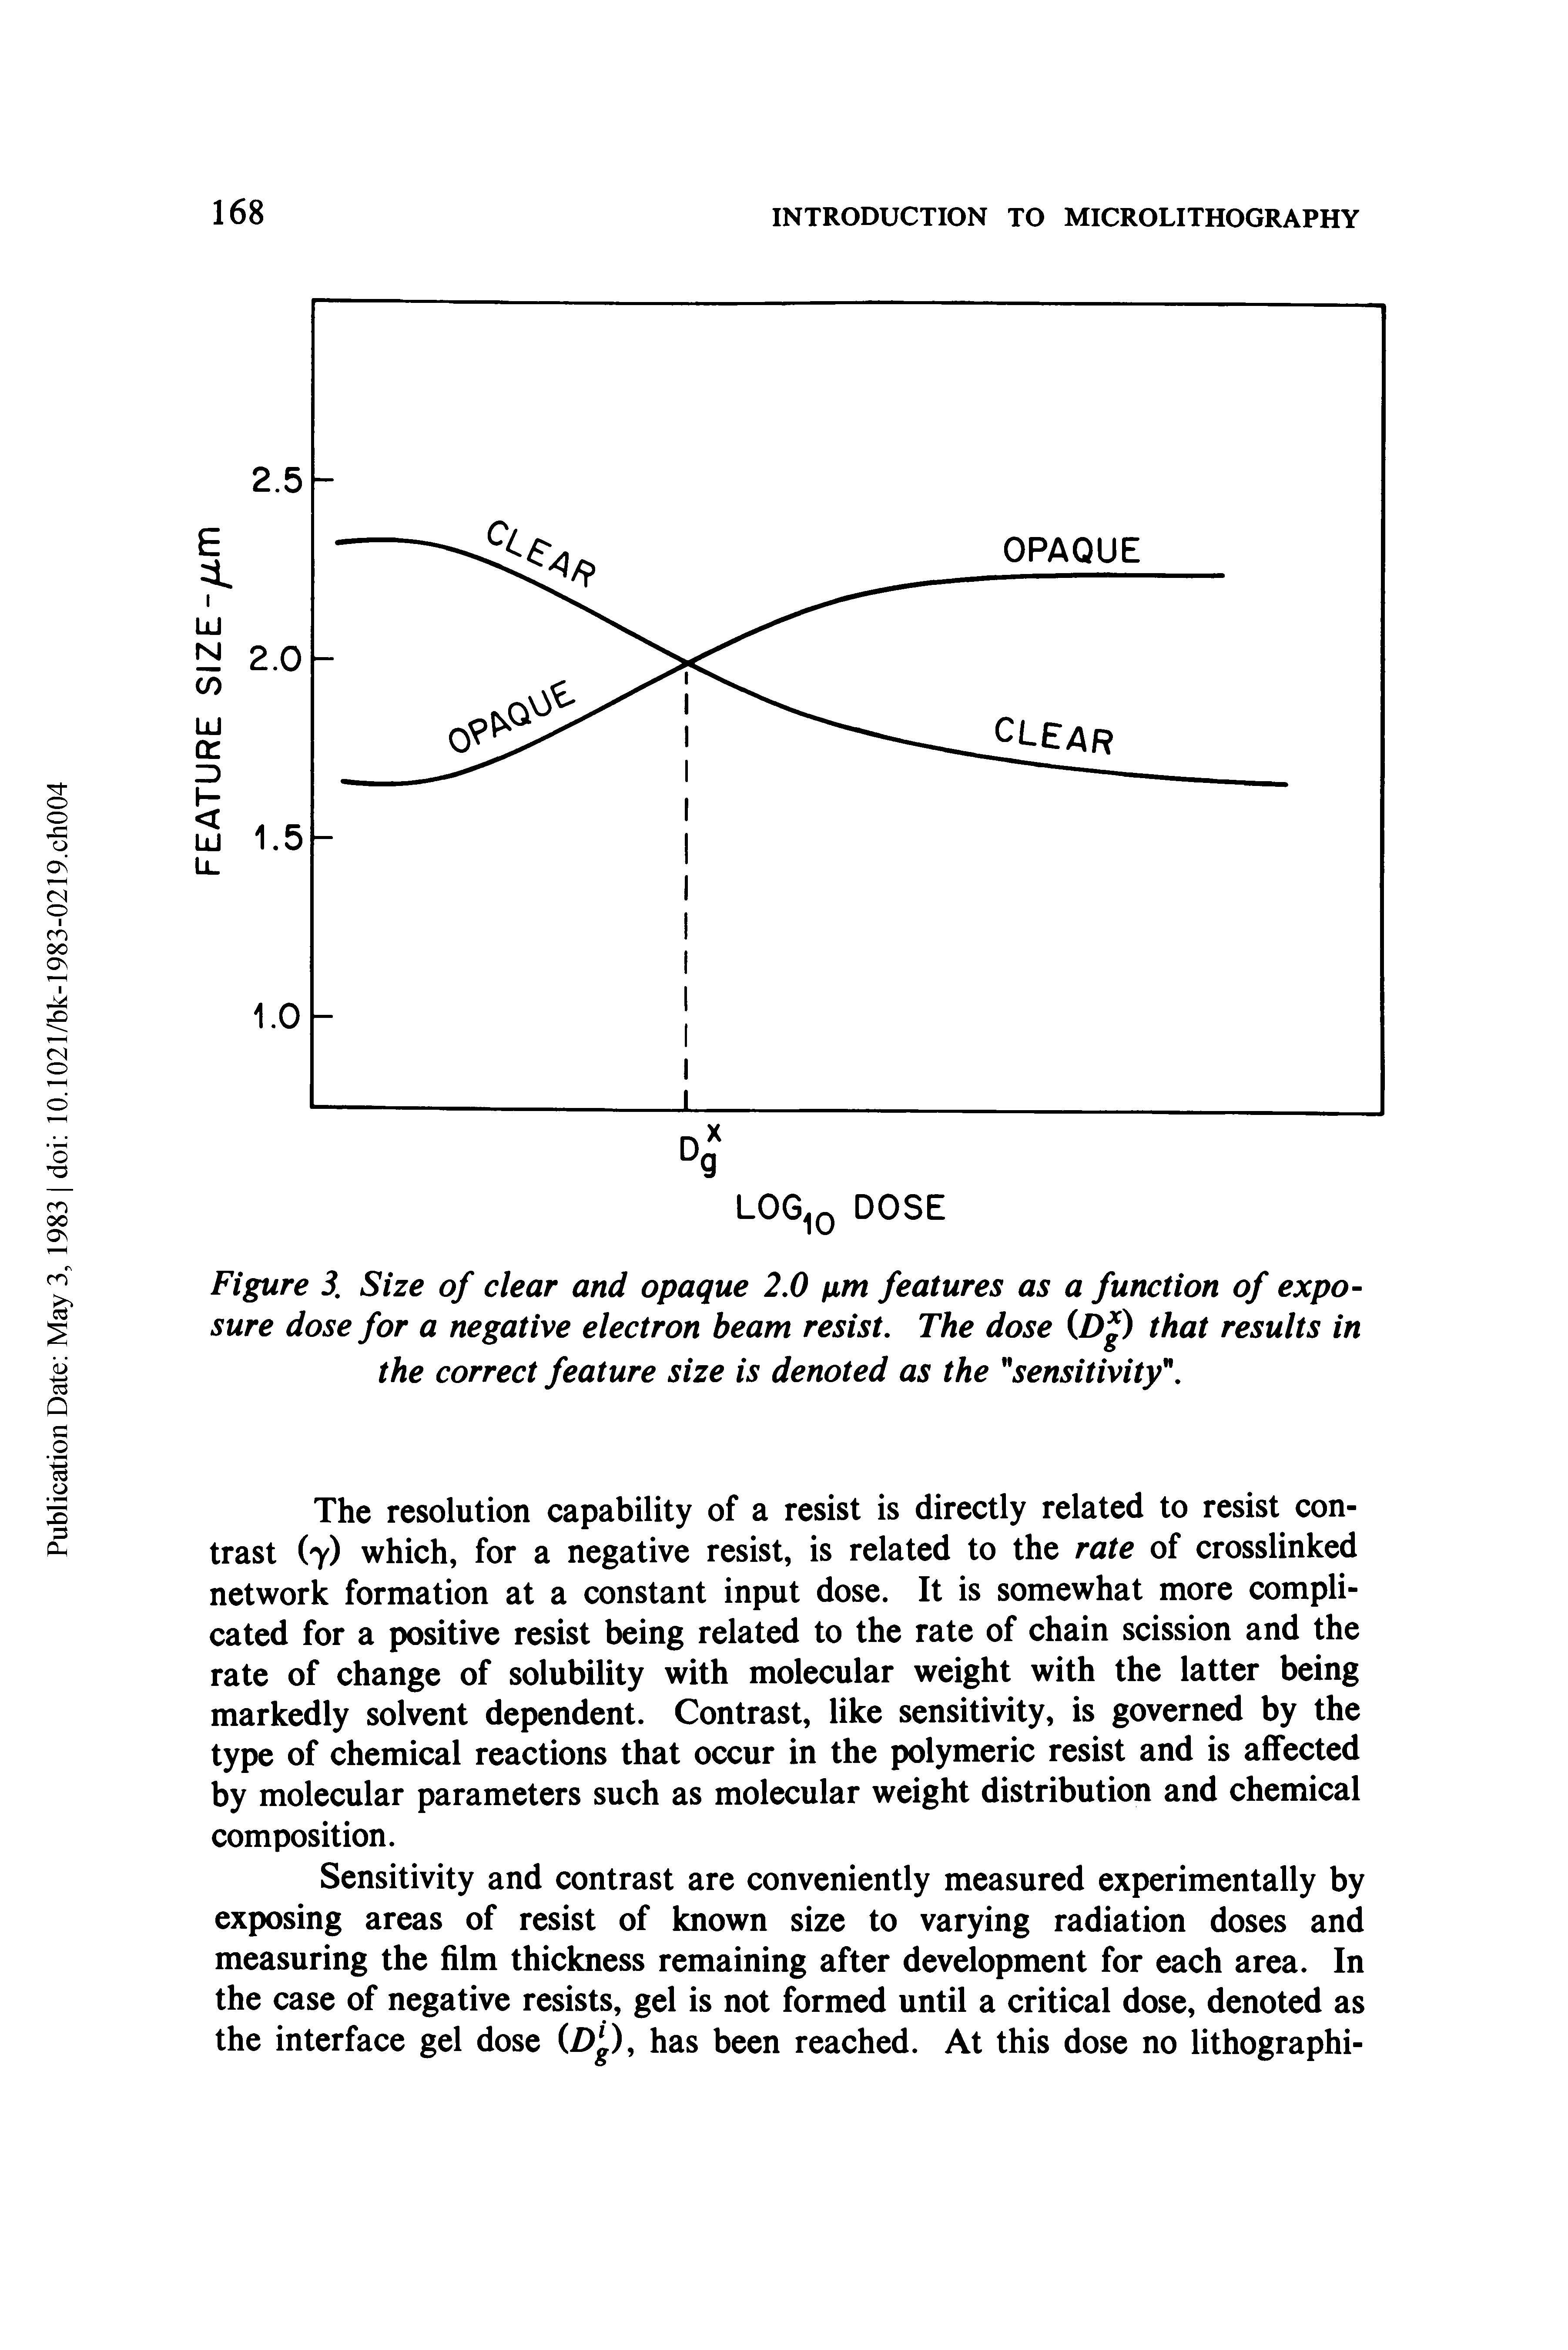 Figure 3. Size of clear and opaque 2.0 fim features as a function of exposure dose for a negative electron beam resist. The dose Dp that results in the correct feature size is denoted as the "sensitivity .